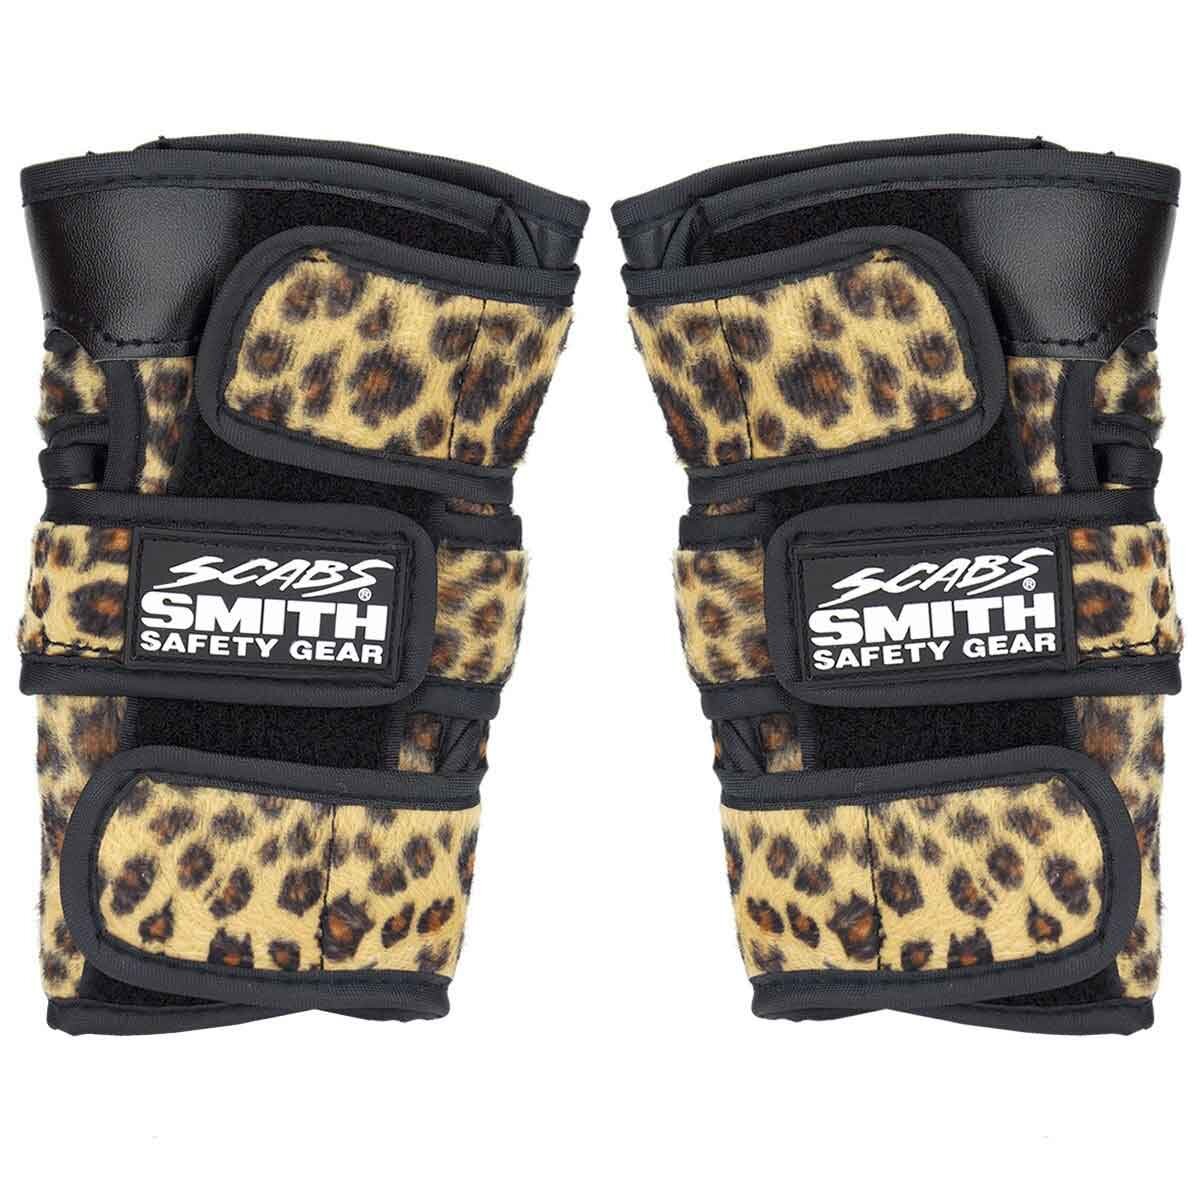 "Wrist Guard- Brown Cheetah" By Smith Scabs